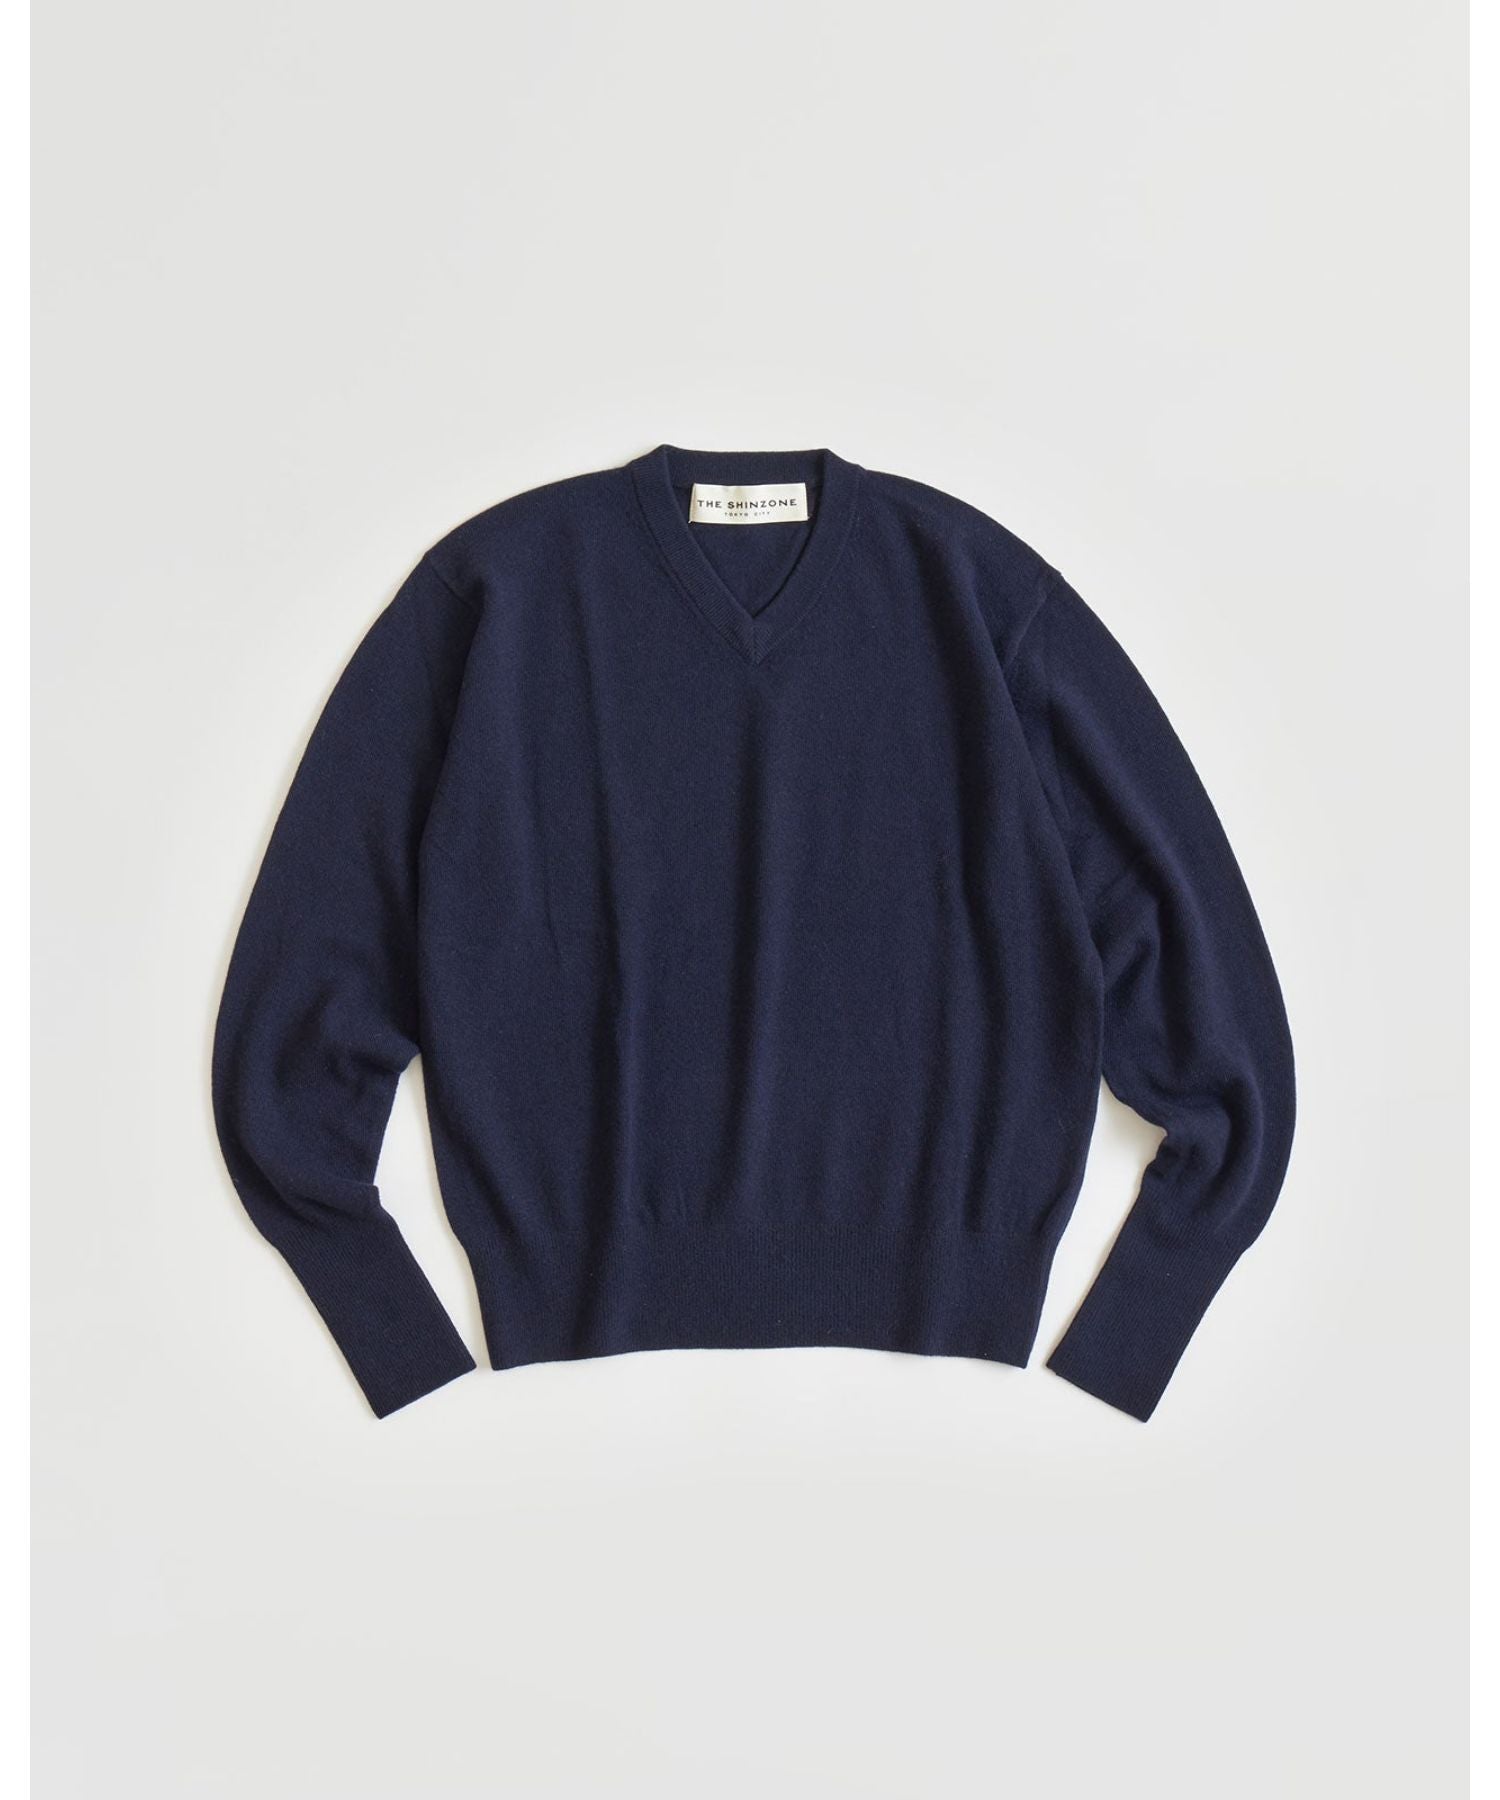 Wool Cashmere Daddy Knit - THE SHINZONE (ザ シンゾーン) - tops